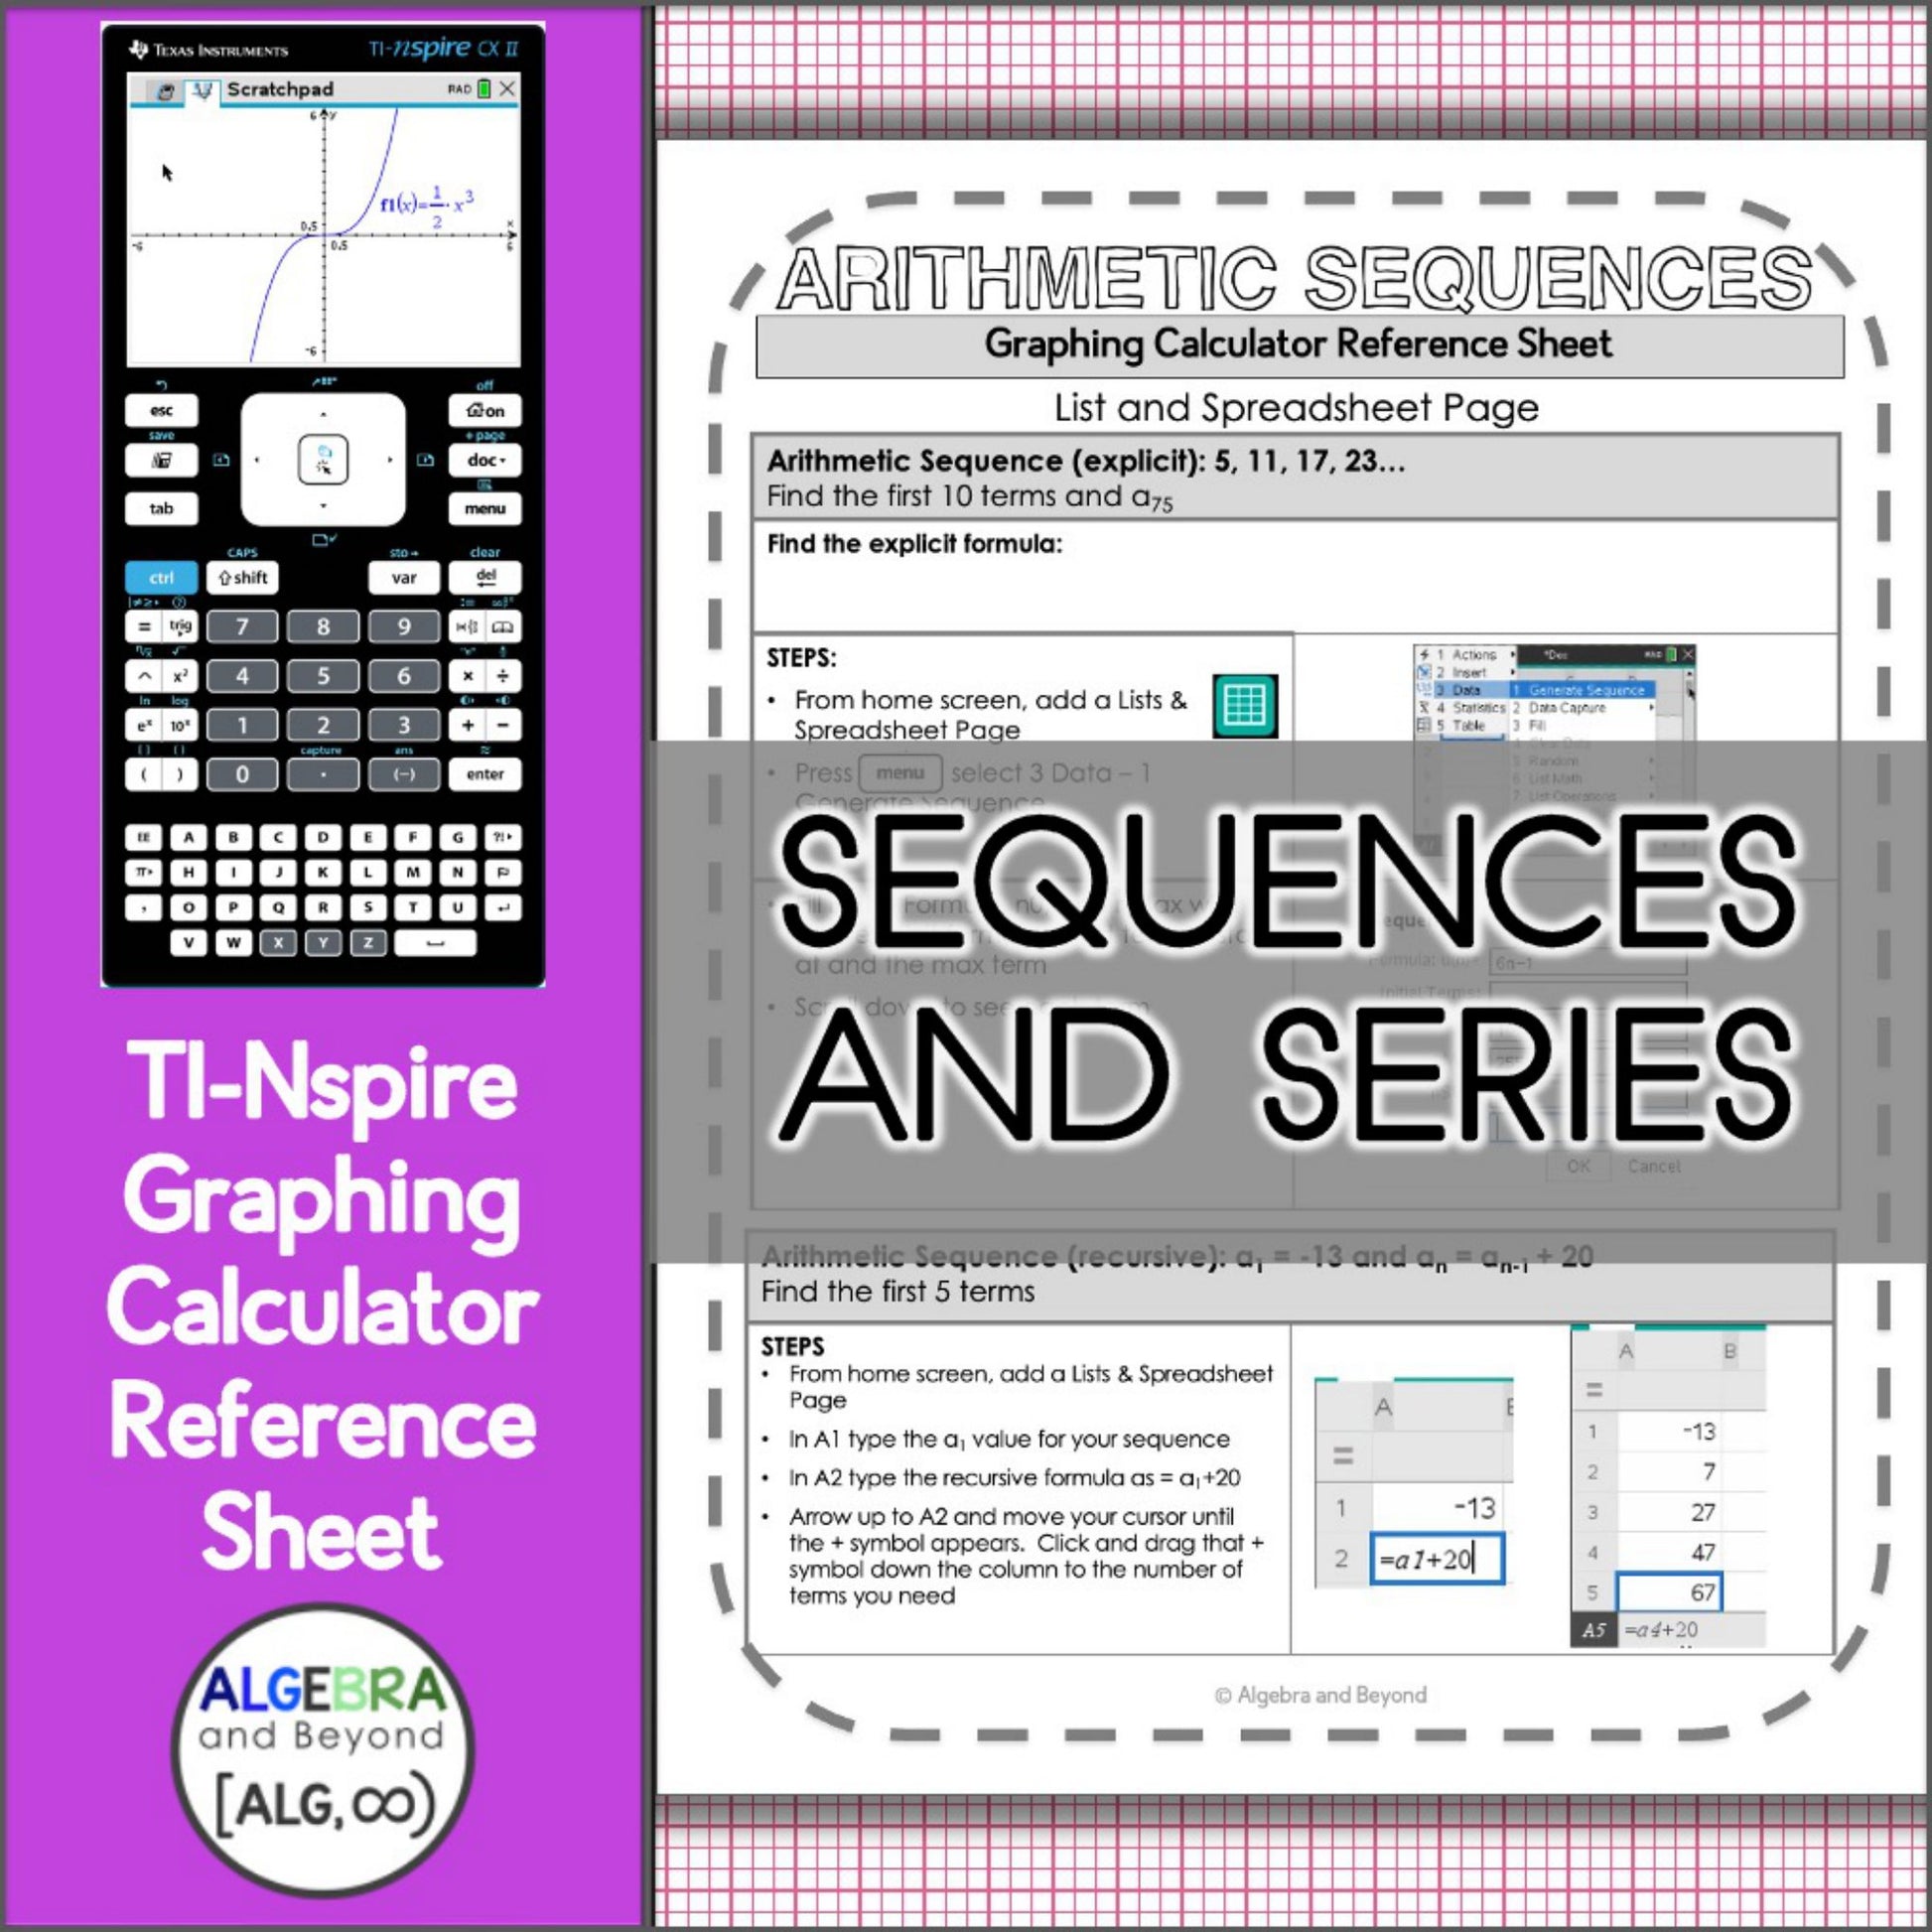 Sequences and Series | TI-Nspire Graphing Calculator Reference Sheet